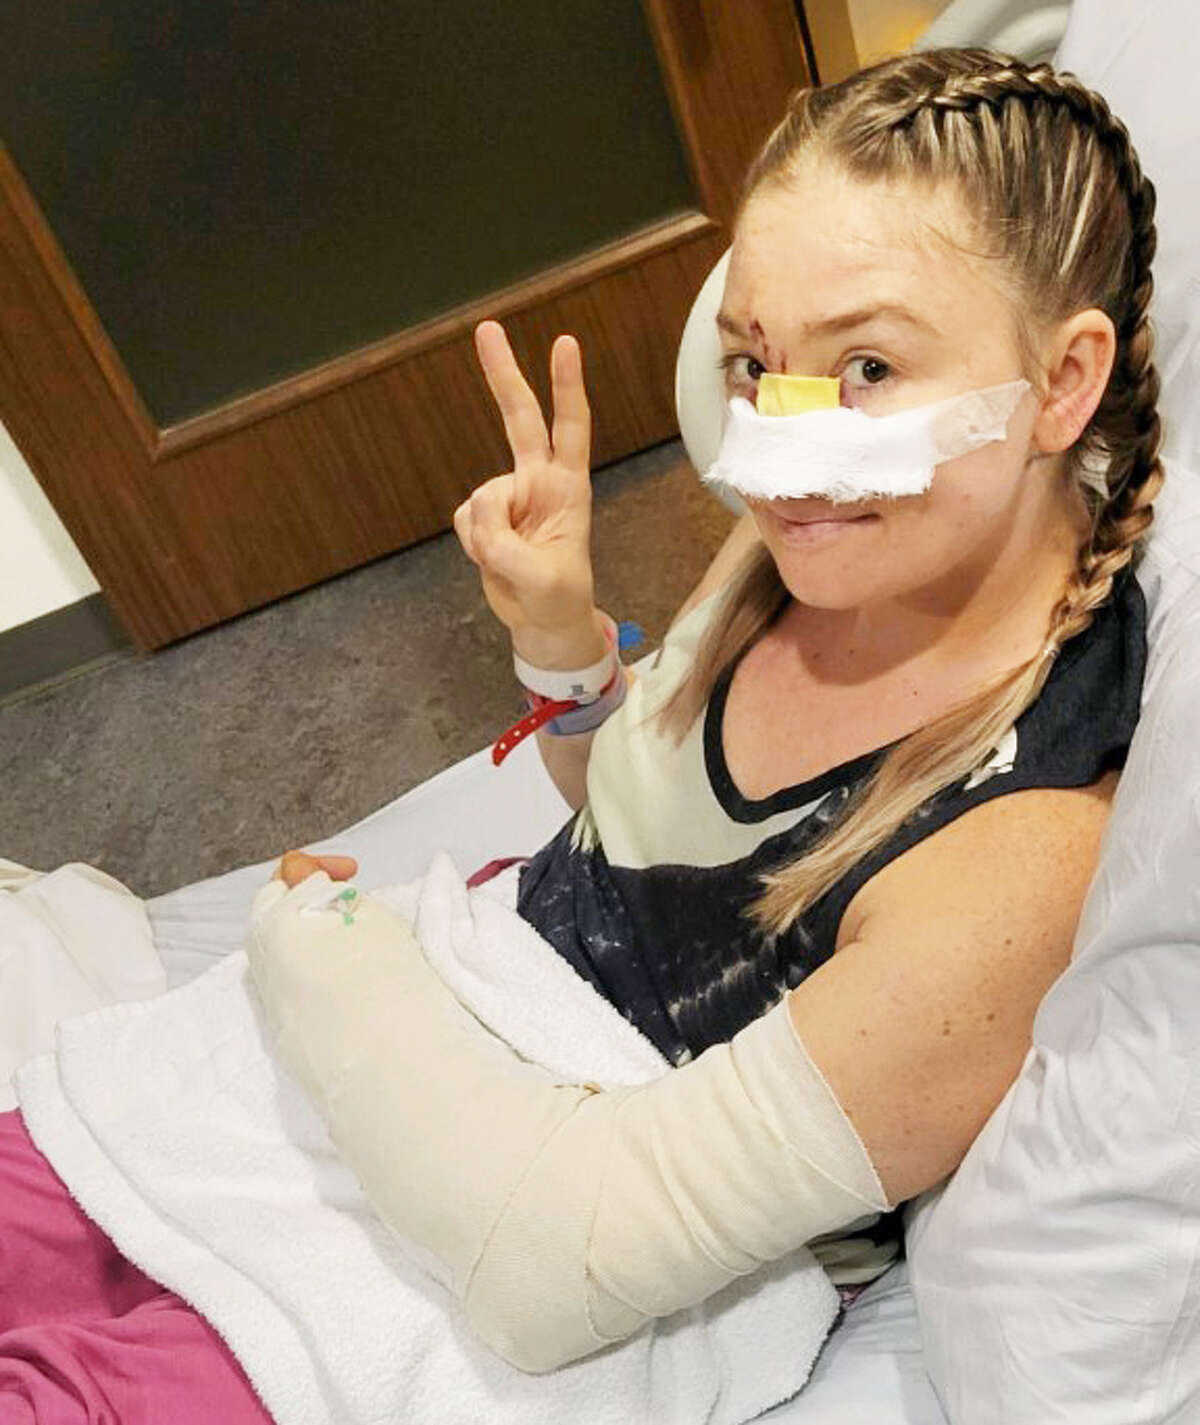 Olivia Quast, 30, formerly of Middletown, was attacked by her rescue dog Feb. 3, leaving her with a "mangled" arm and severe damage to her face. A GoFundMe has been set up to help pay for medical bills associated with plastic surgery to replace her nose.